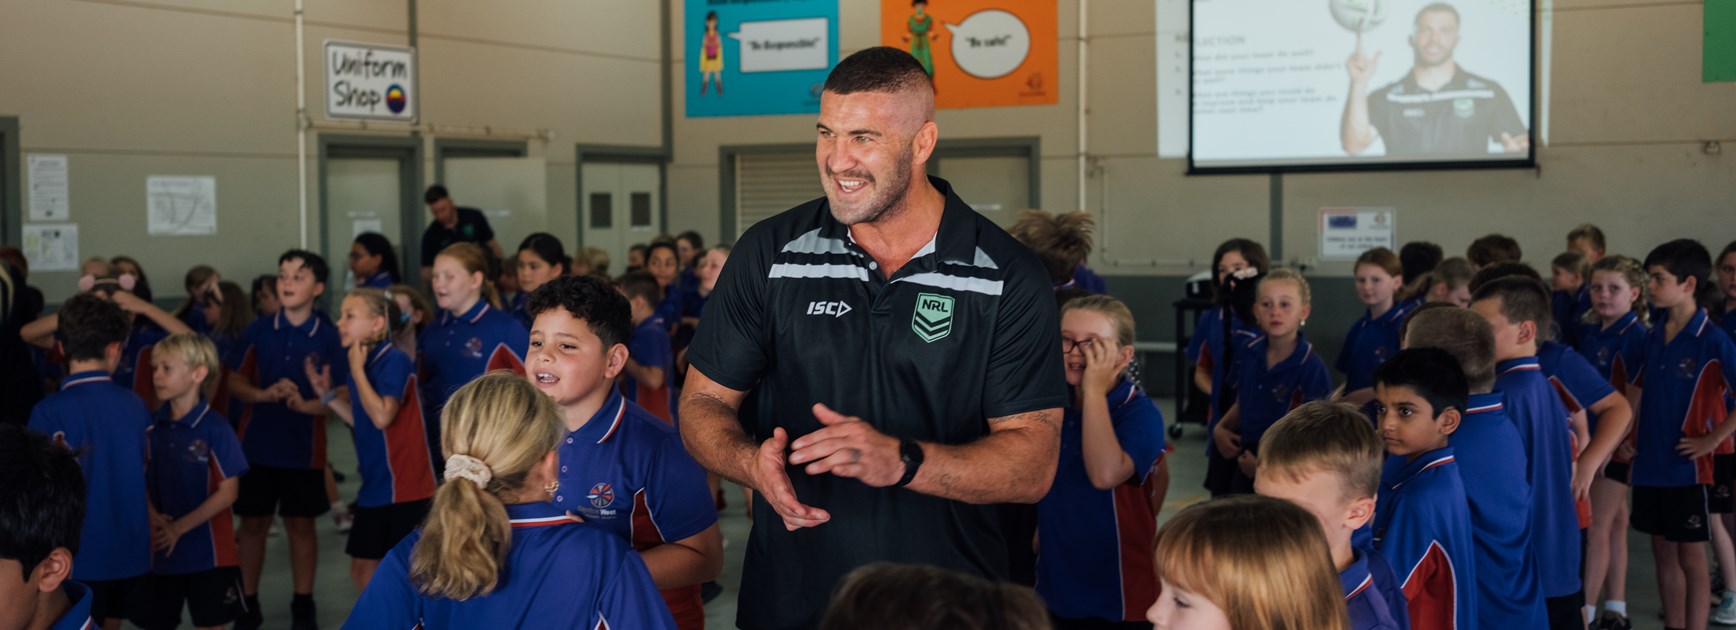 All heart: Tough man Thompson continuing to make rugby league impact